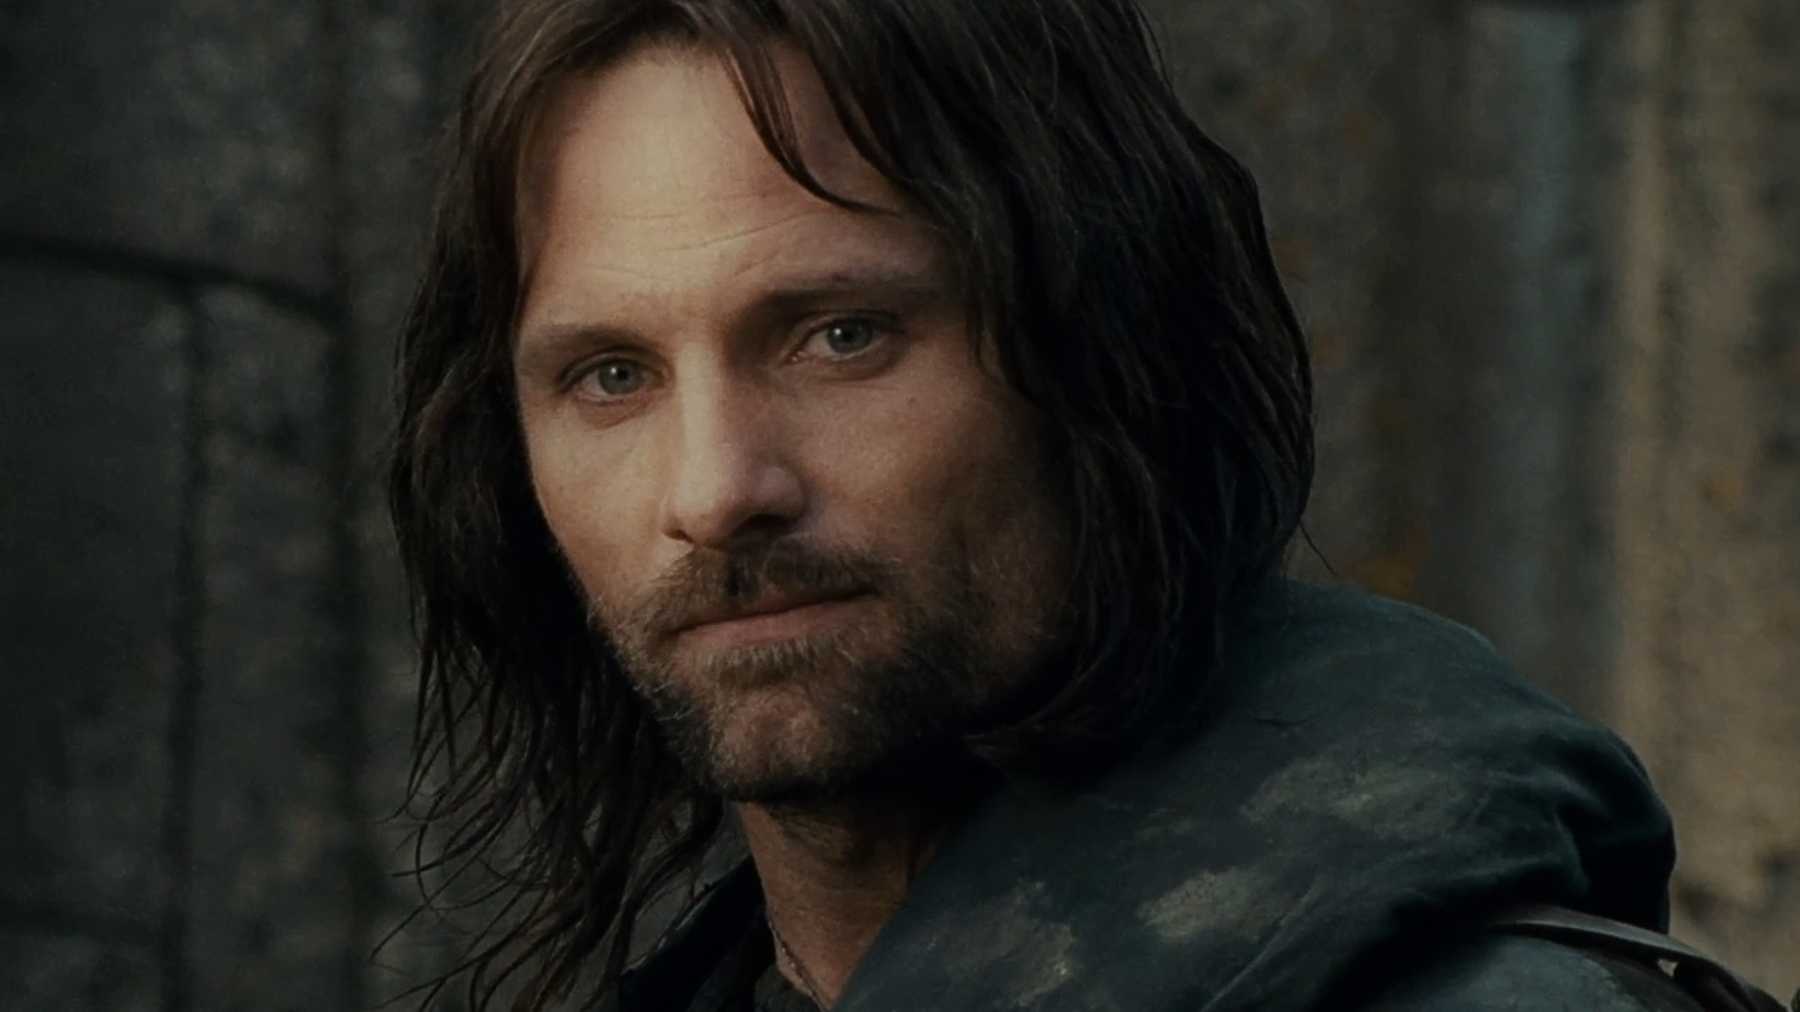 JRR Tolkien's 'Lord of the Rings': 15 Facts About 'Fellowship of the Ring'  (Photos) - TheWrap